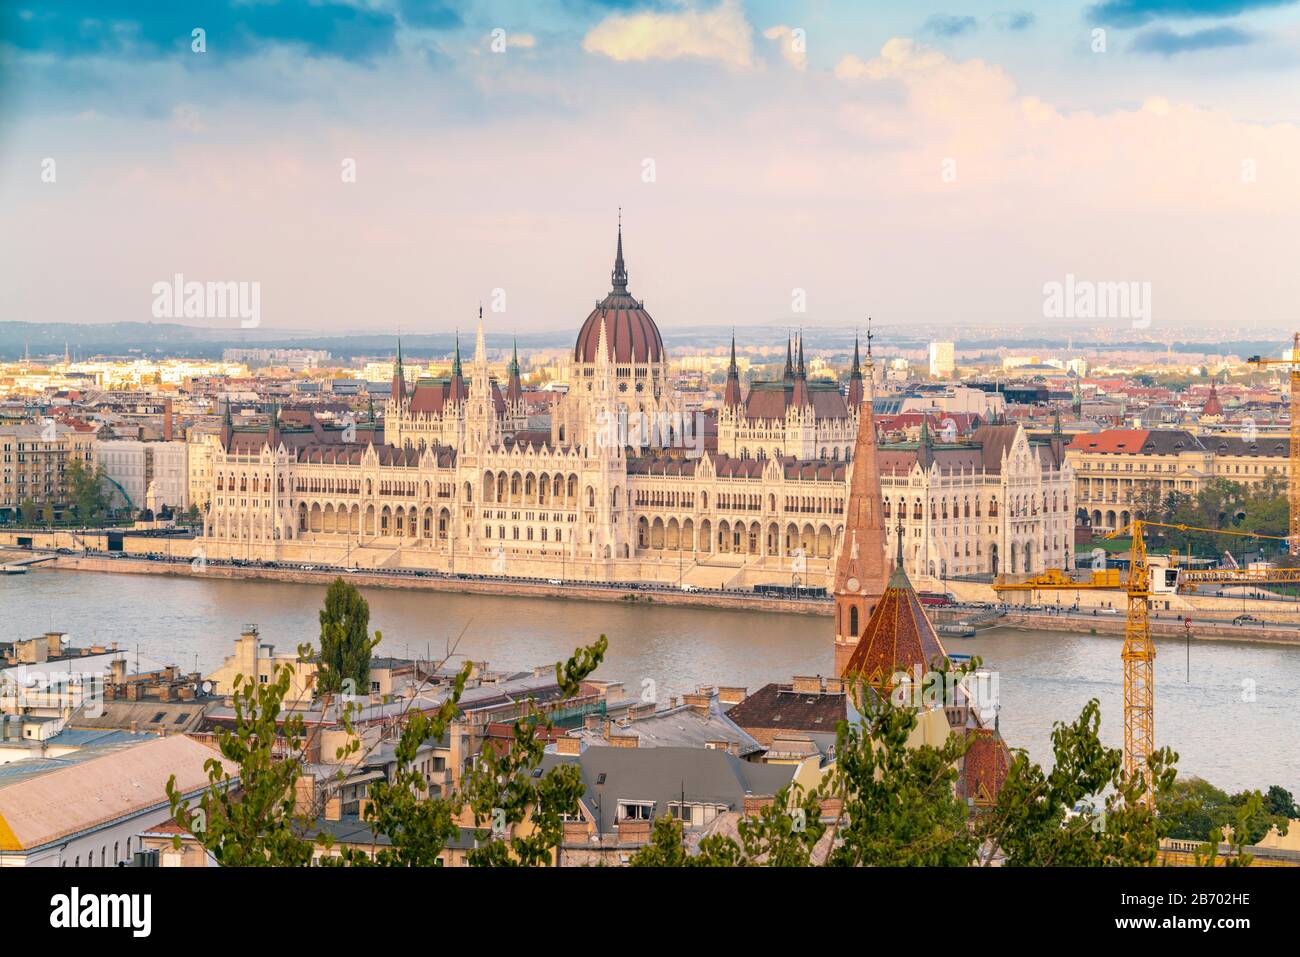 The Parliament's Palace and danube seen from Fisherman's bastion Stock Photo